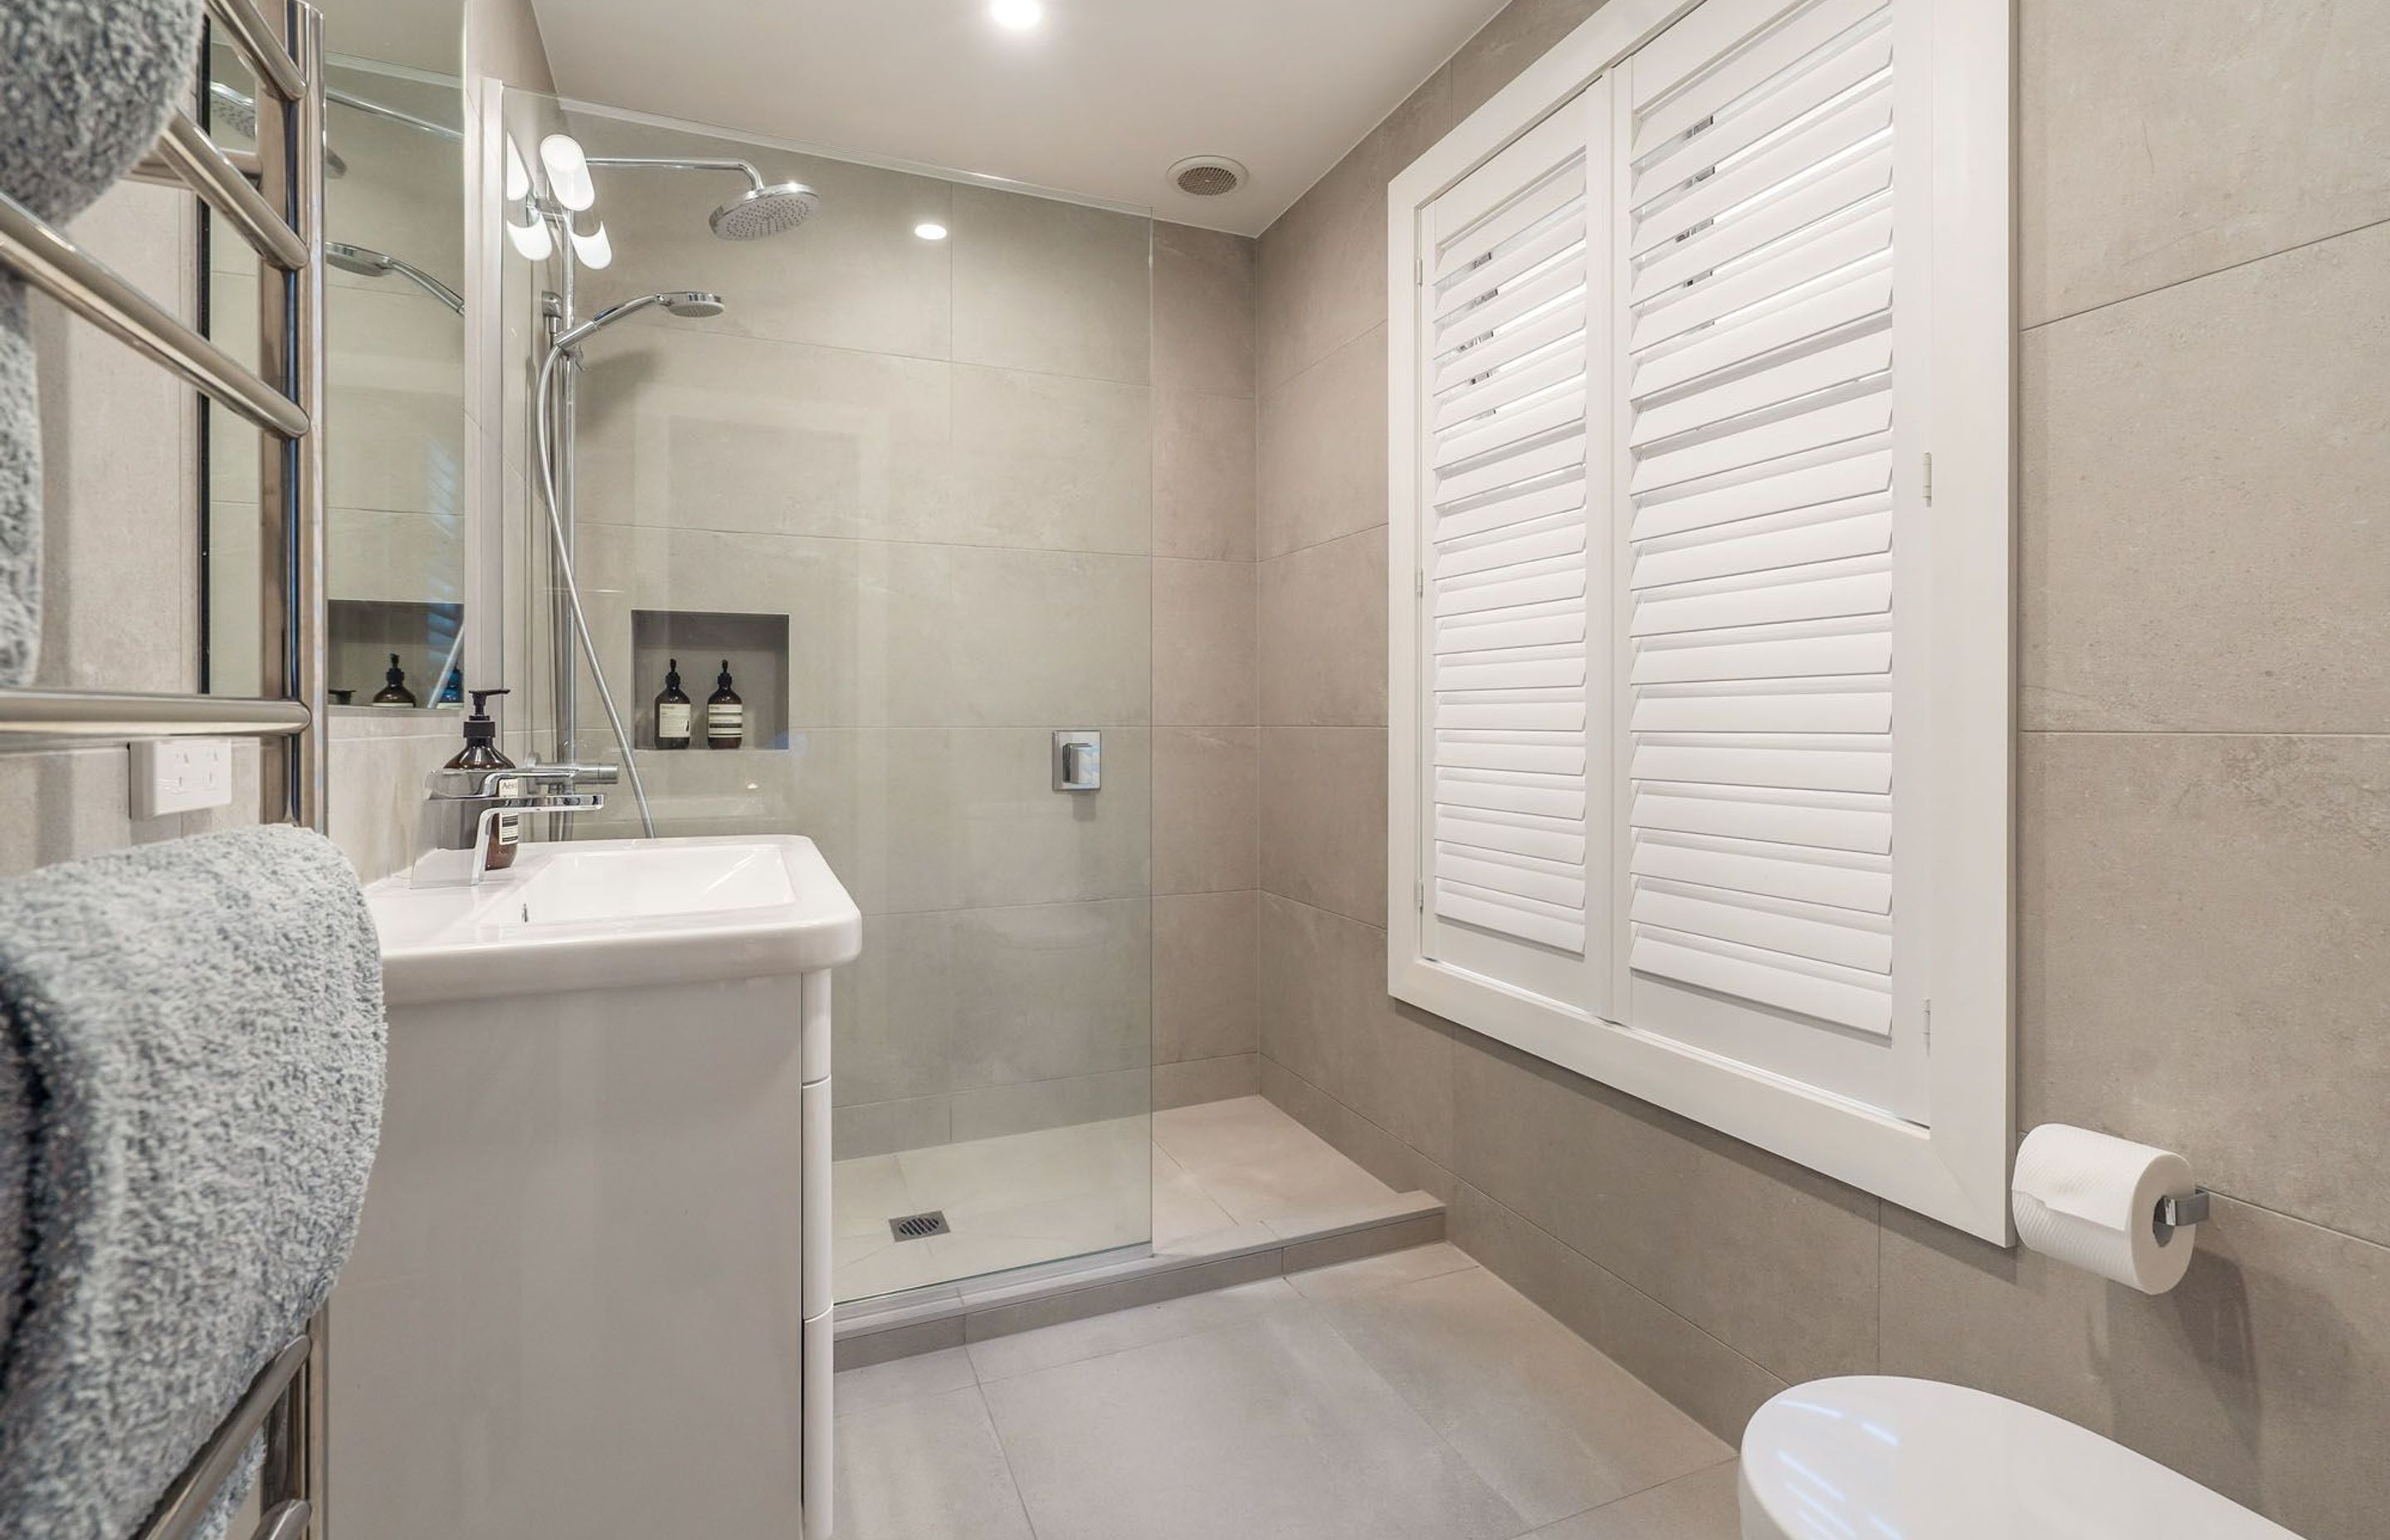 Similarly, this en suite bathroom has a very 'modern-classic' feel with traditional elements such as the shuttered window and Art Deco-style light fixture playing off against the modern fittings and colour scheme.